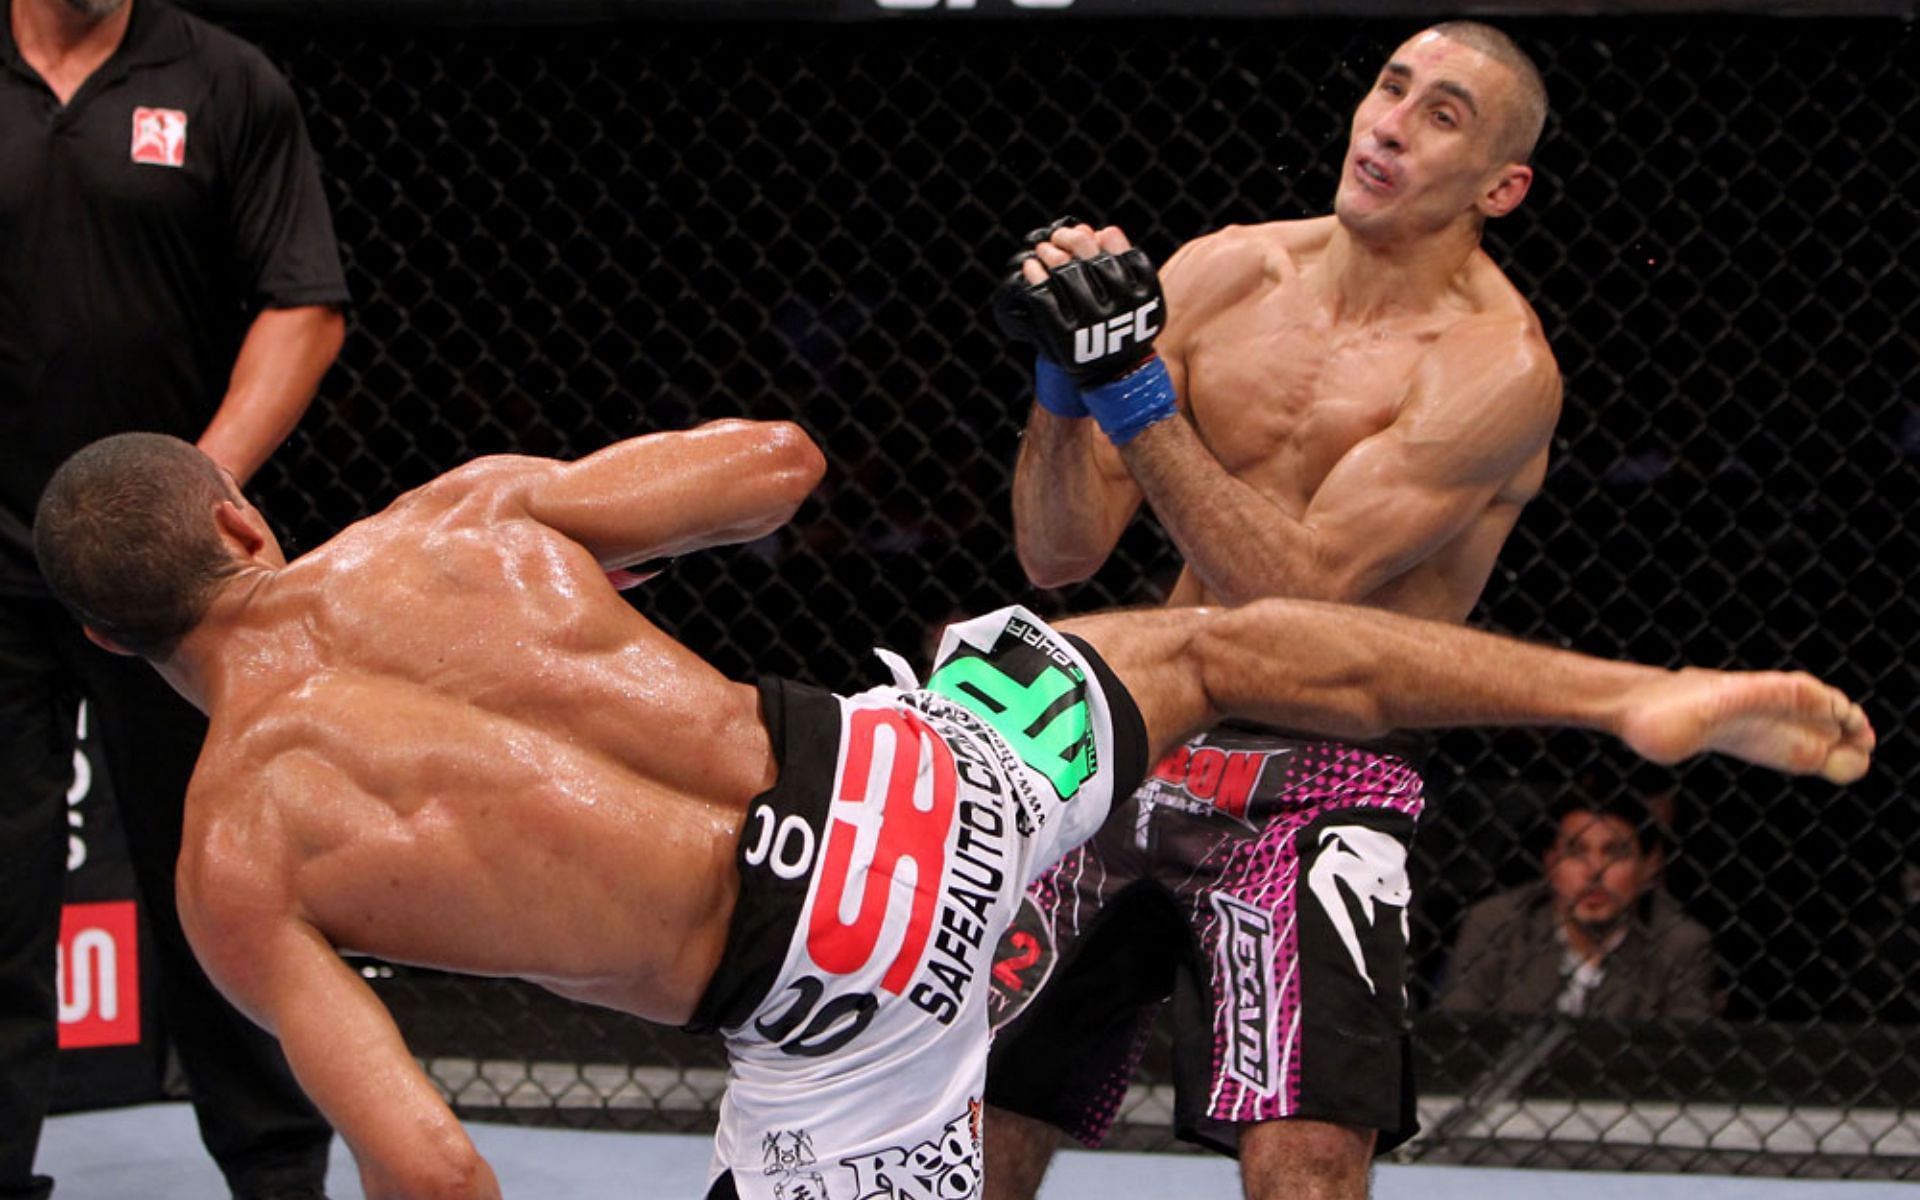 Edson Barboza&#039;s spinning wheel kick on Terry Etim remains an all-time highlight reel moment